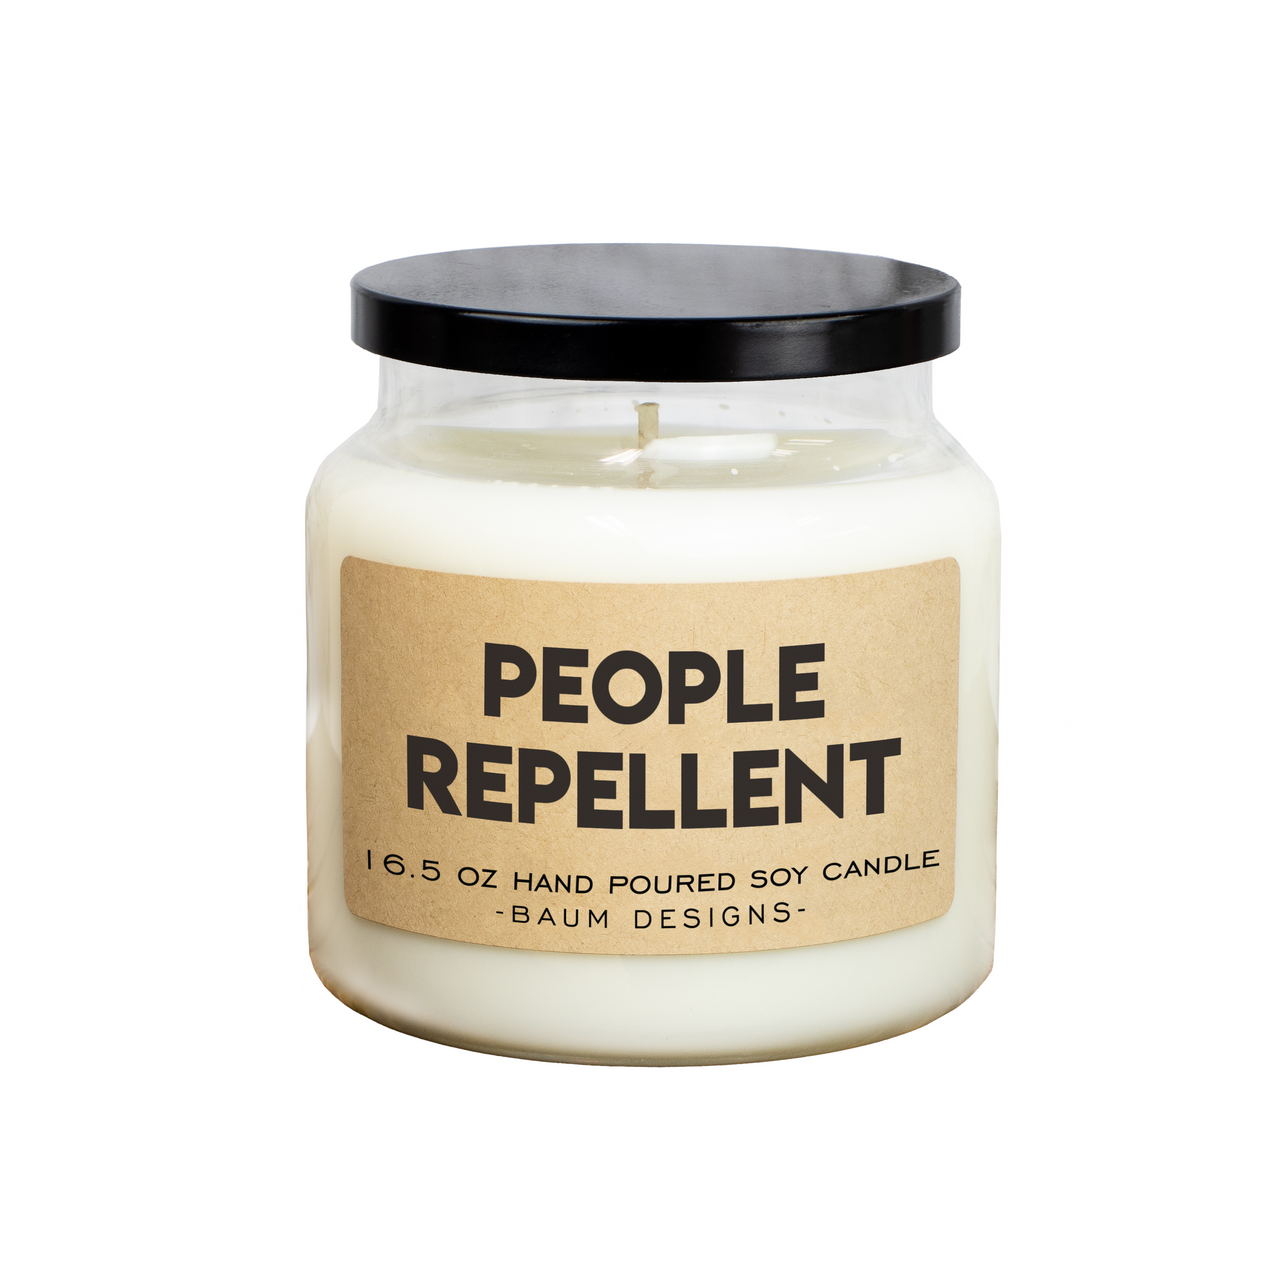 People Repellent Soy Candle